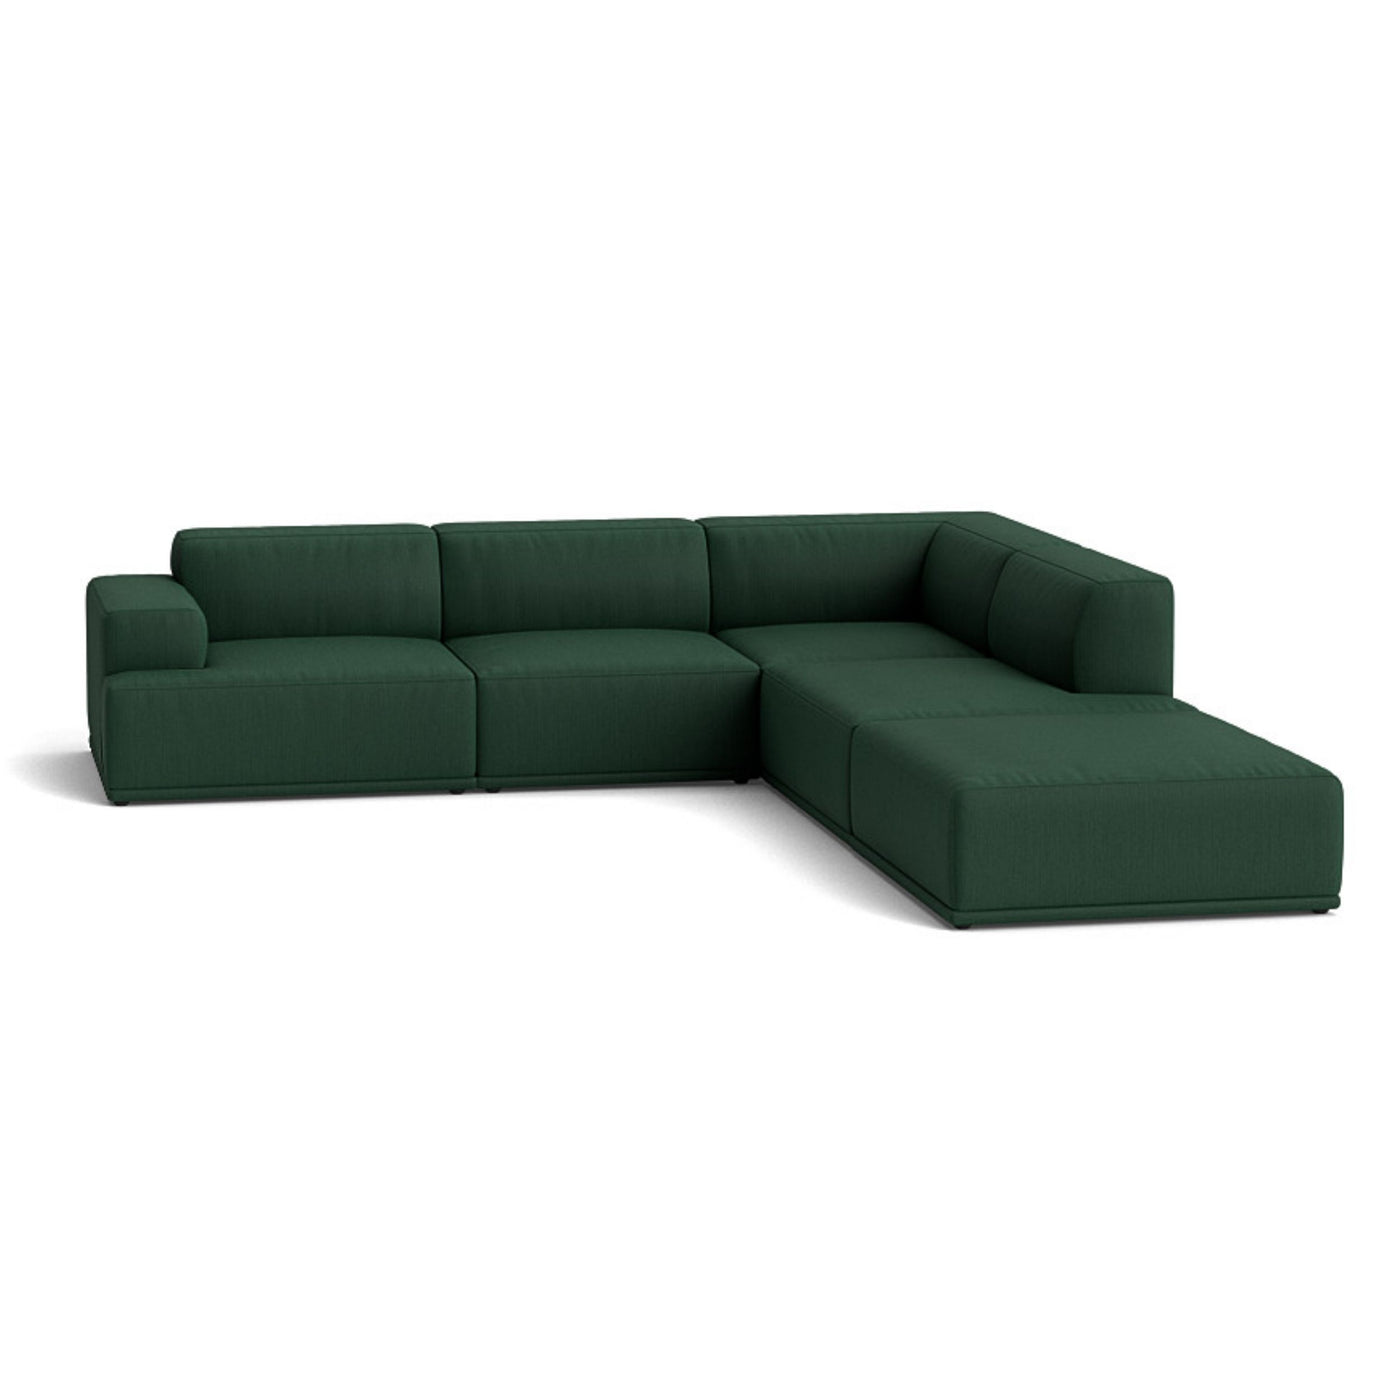 Muuto Connect Soft Modular Corner Sofa, configuration 2. Made-to-order from someday designs. #colour_balder-982